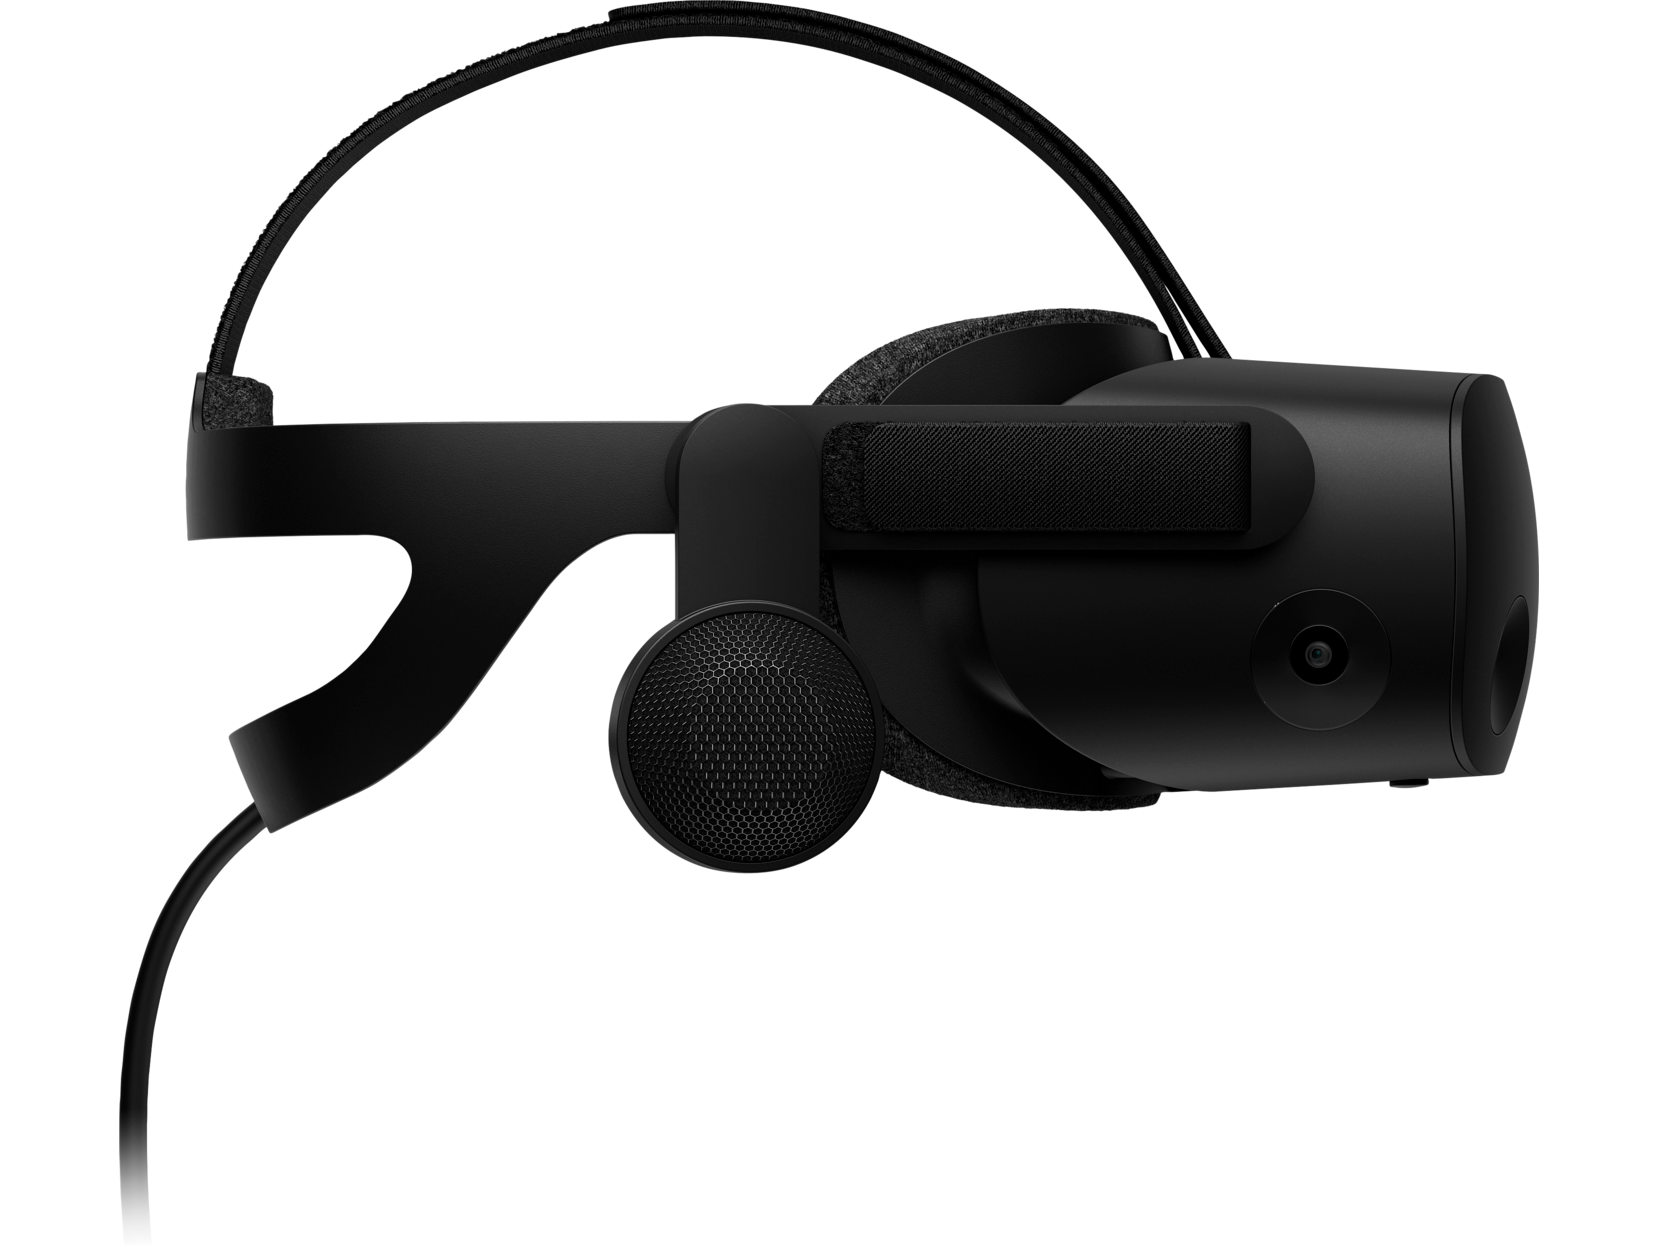 HP Reverb G2 Virtual Reality Headset - image 6 of 7